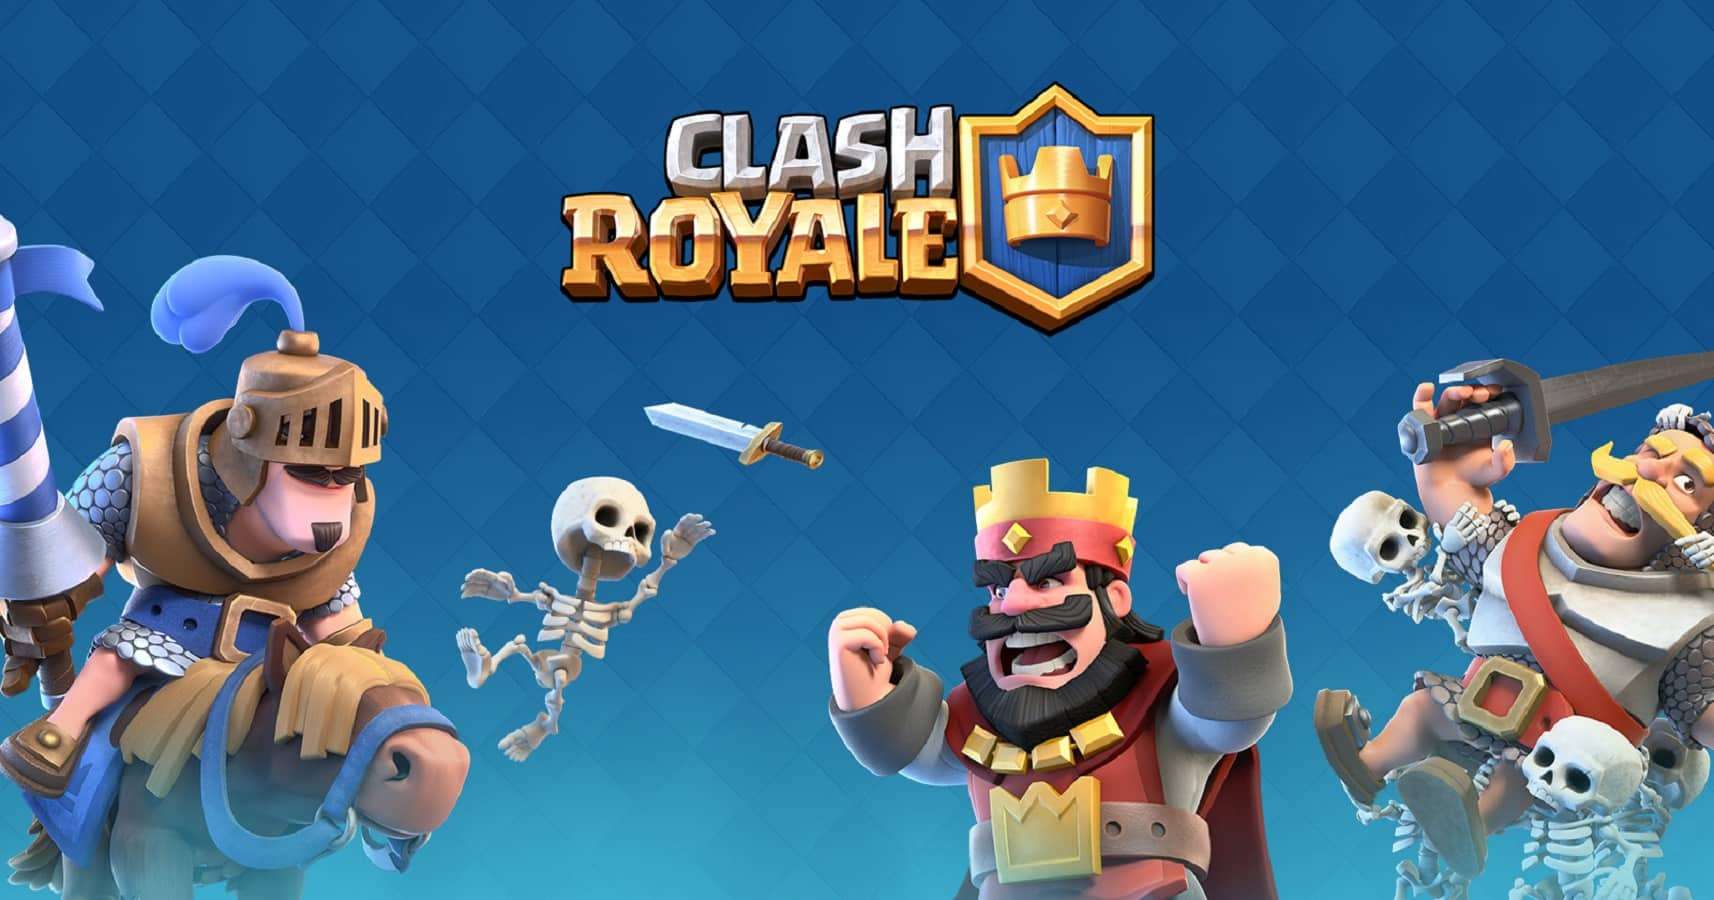 cover art for Clash Royale featuring multiple in-game characters